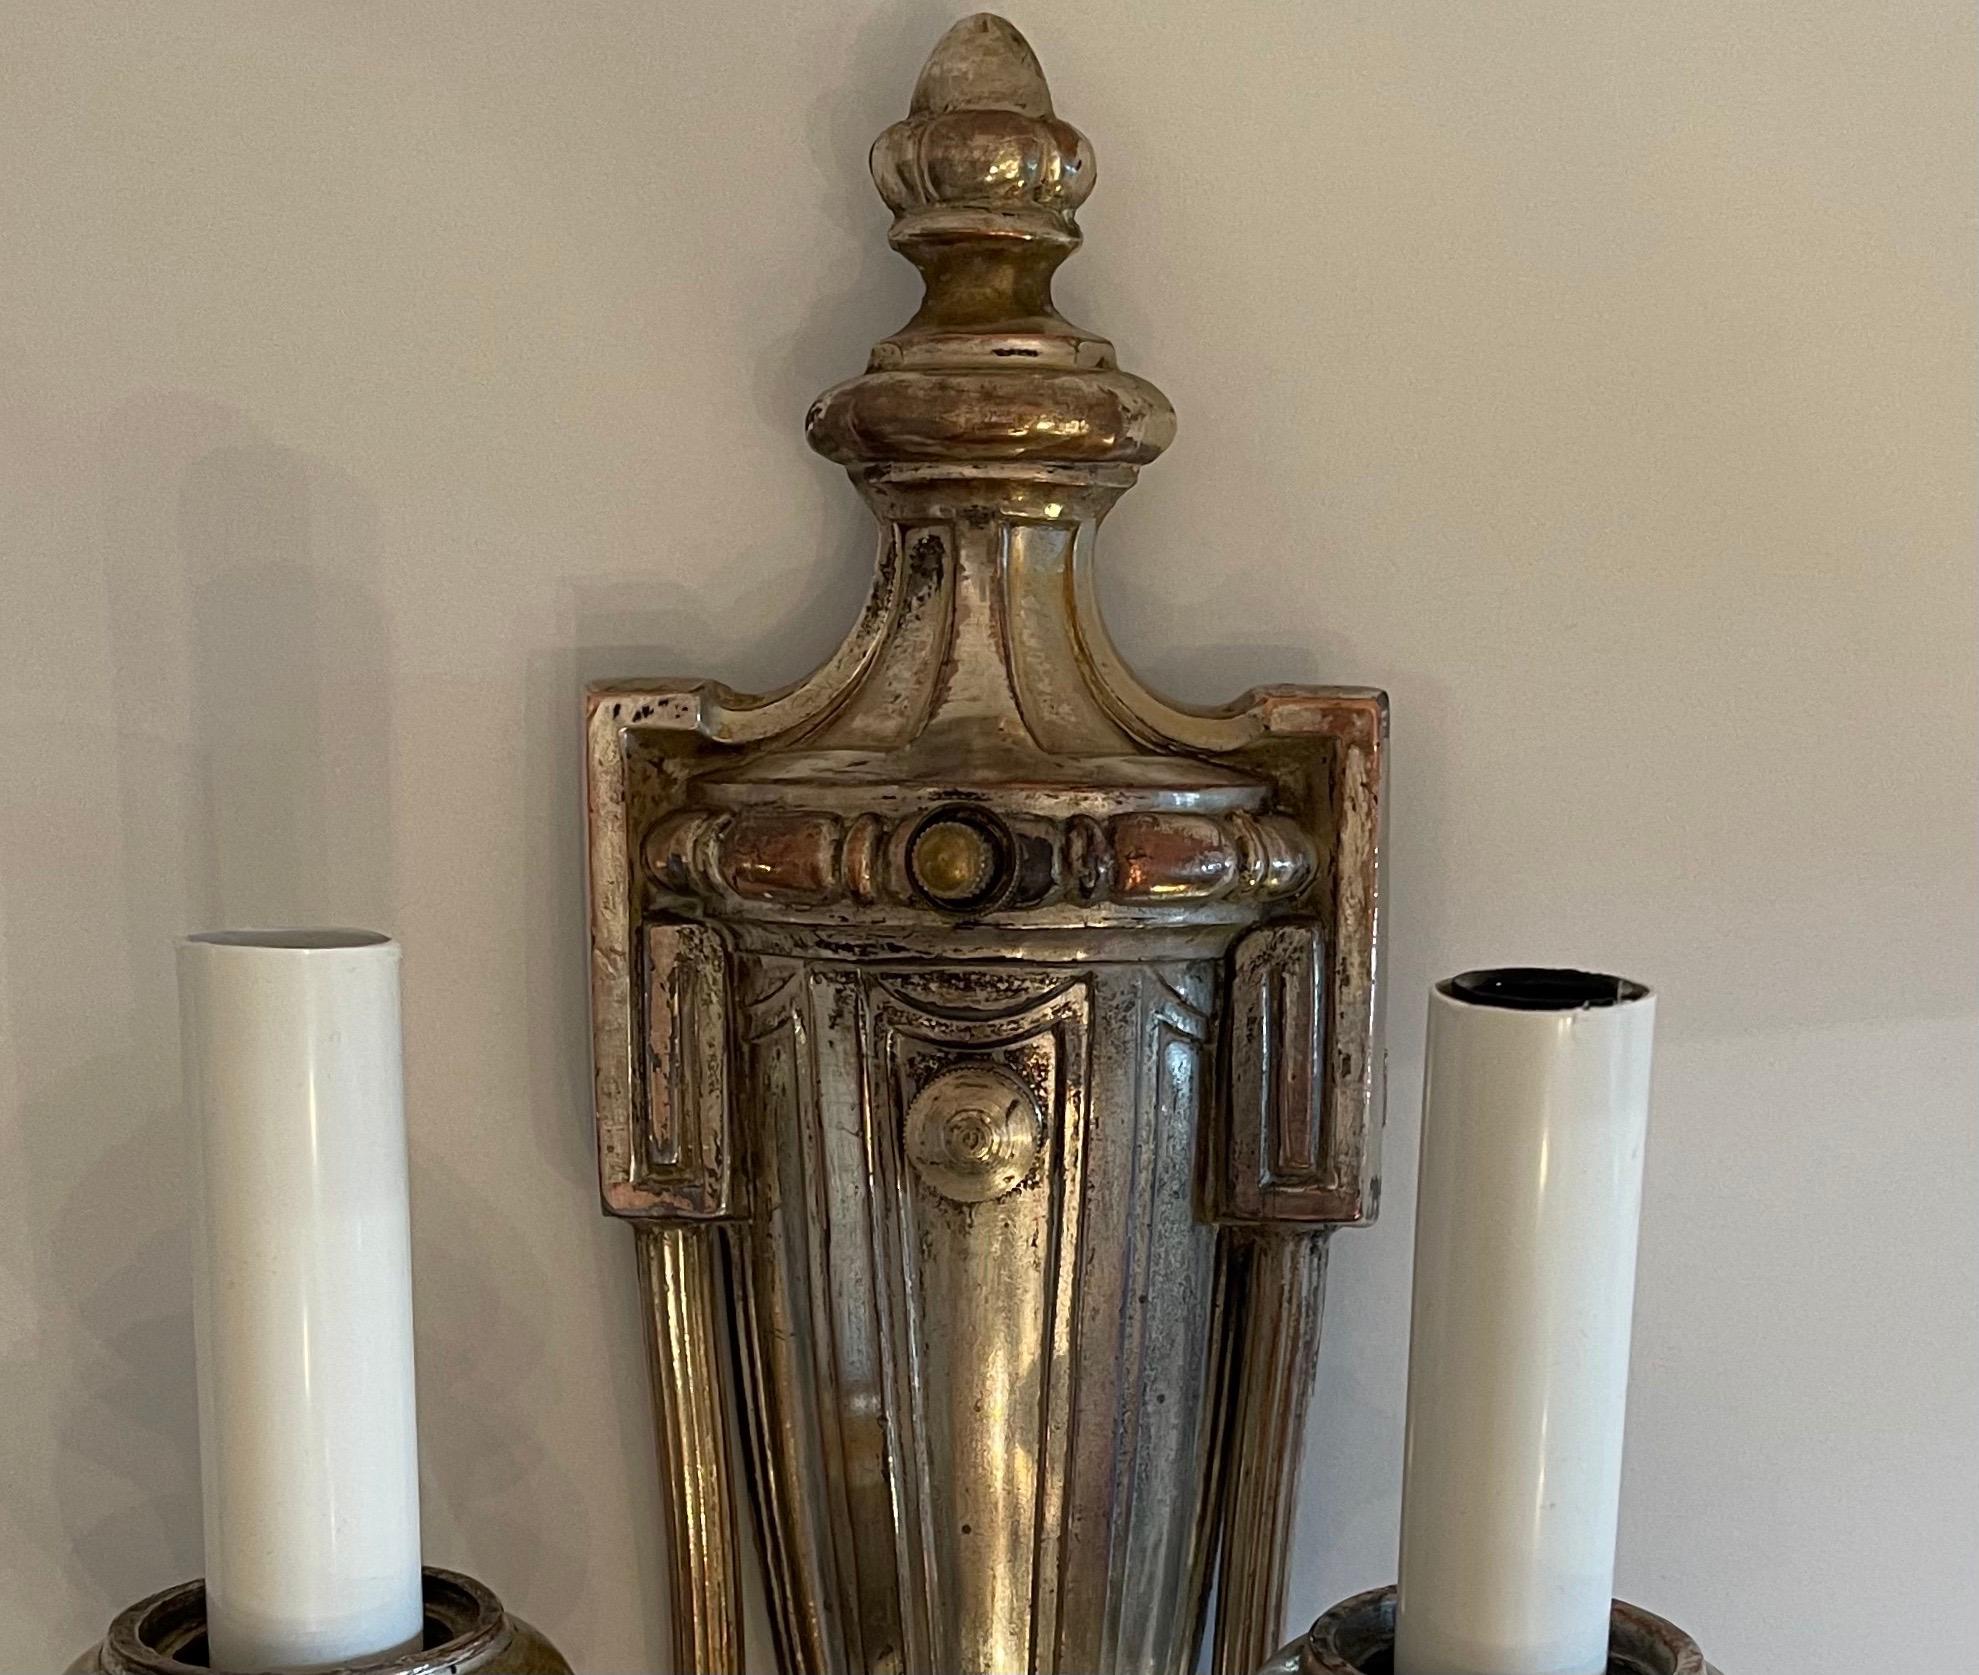 Handsome Pair of Caldwell Silvered Bronze Adams Regency Urn Two-Light Sconces In Good Condition For Sale In Roslyn, NY